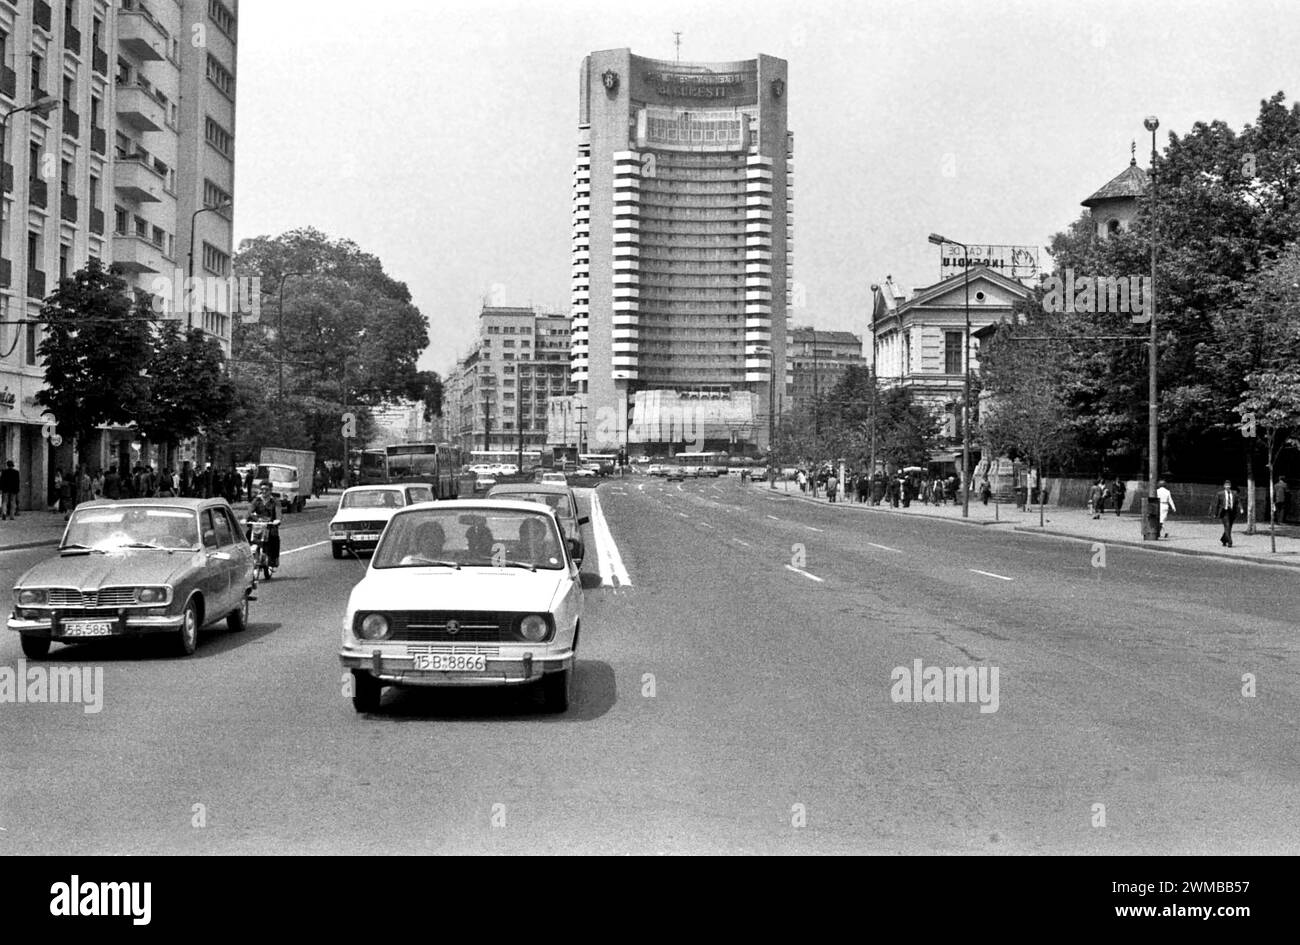 Bucharest, Romania, approx. 1980.  Vehicles driving on Boulevard I.C. Bratianu through the University Square, with the Intercontinental Hotel seen in the back. Stock Photo